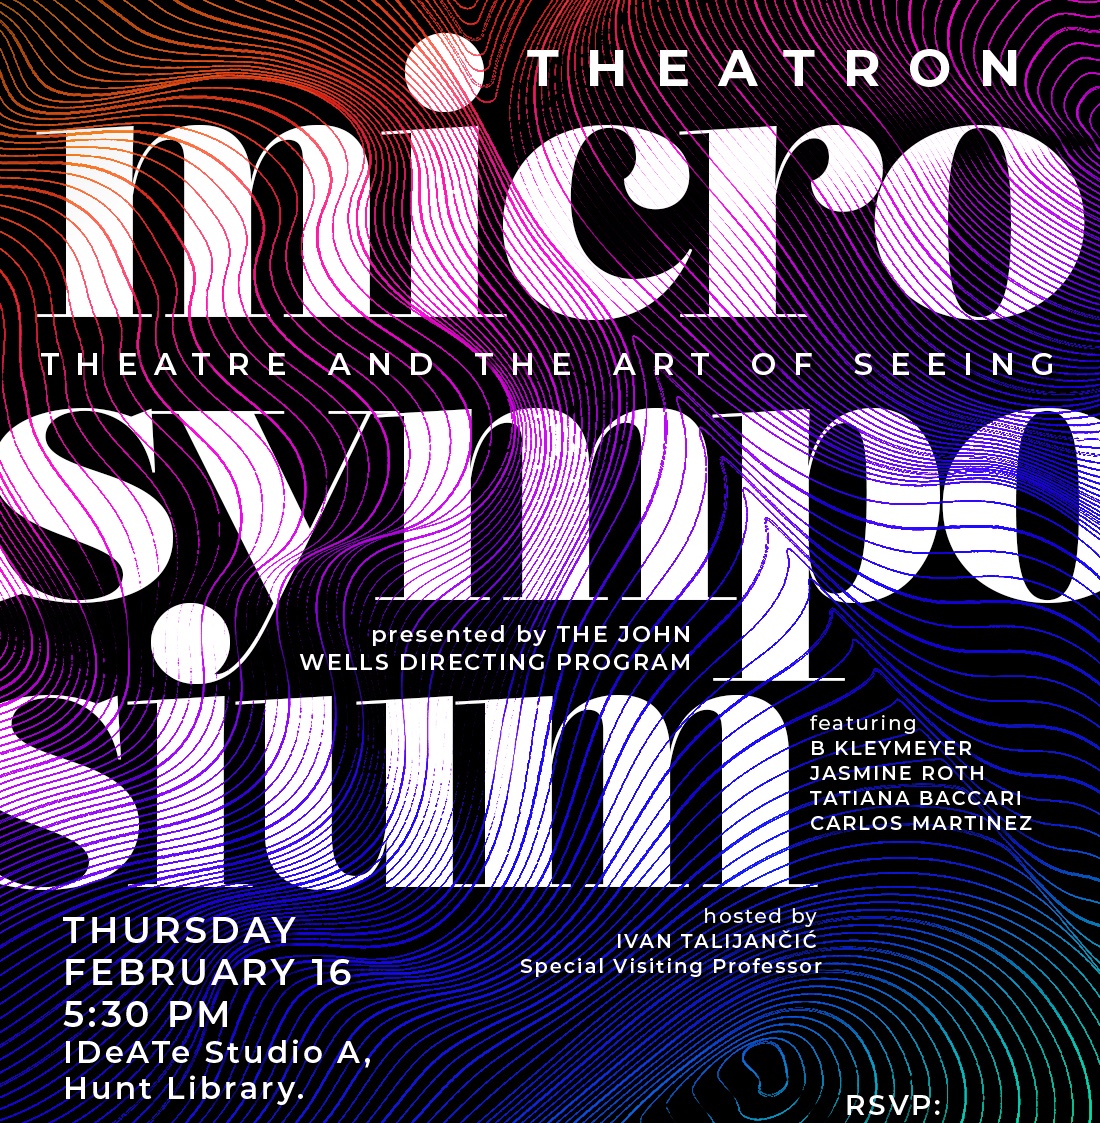 Join @cmudrama and us for 'theatron: a micro-symposium on theater and the art of seeing.' Hear lectures on #theater and theory from @talijancic's MFA Director's Lab students. Thursday, 2/16, 5:30pm in Hunt Library, @CMUIDeATe Studio A. 🎭 Register today: bit.ly/40wD6ng